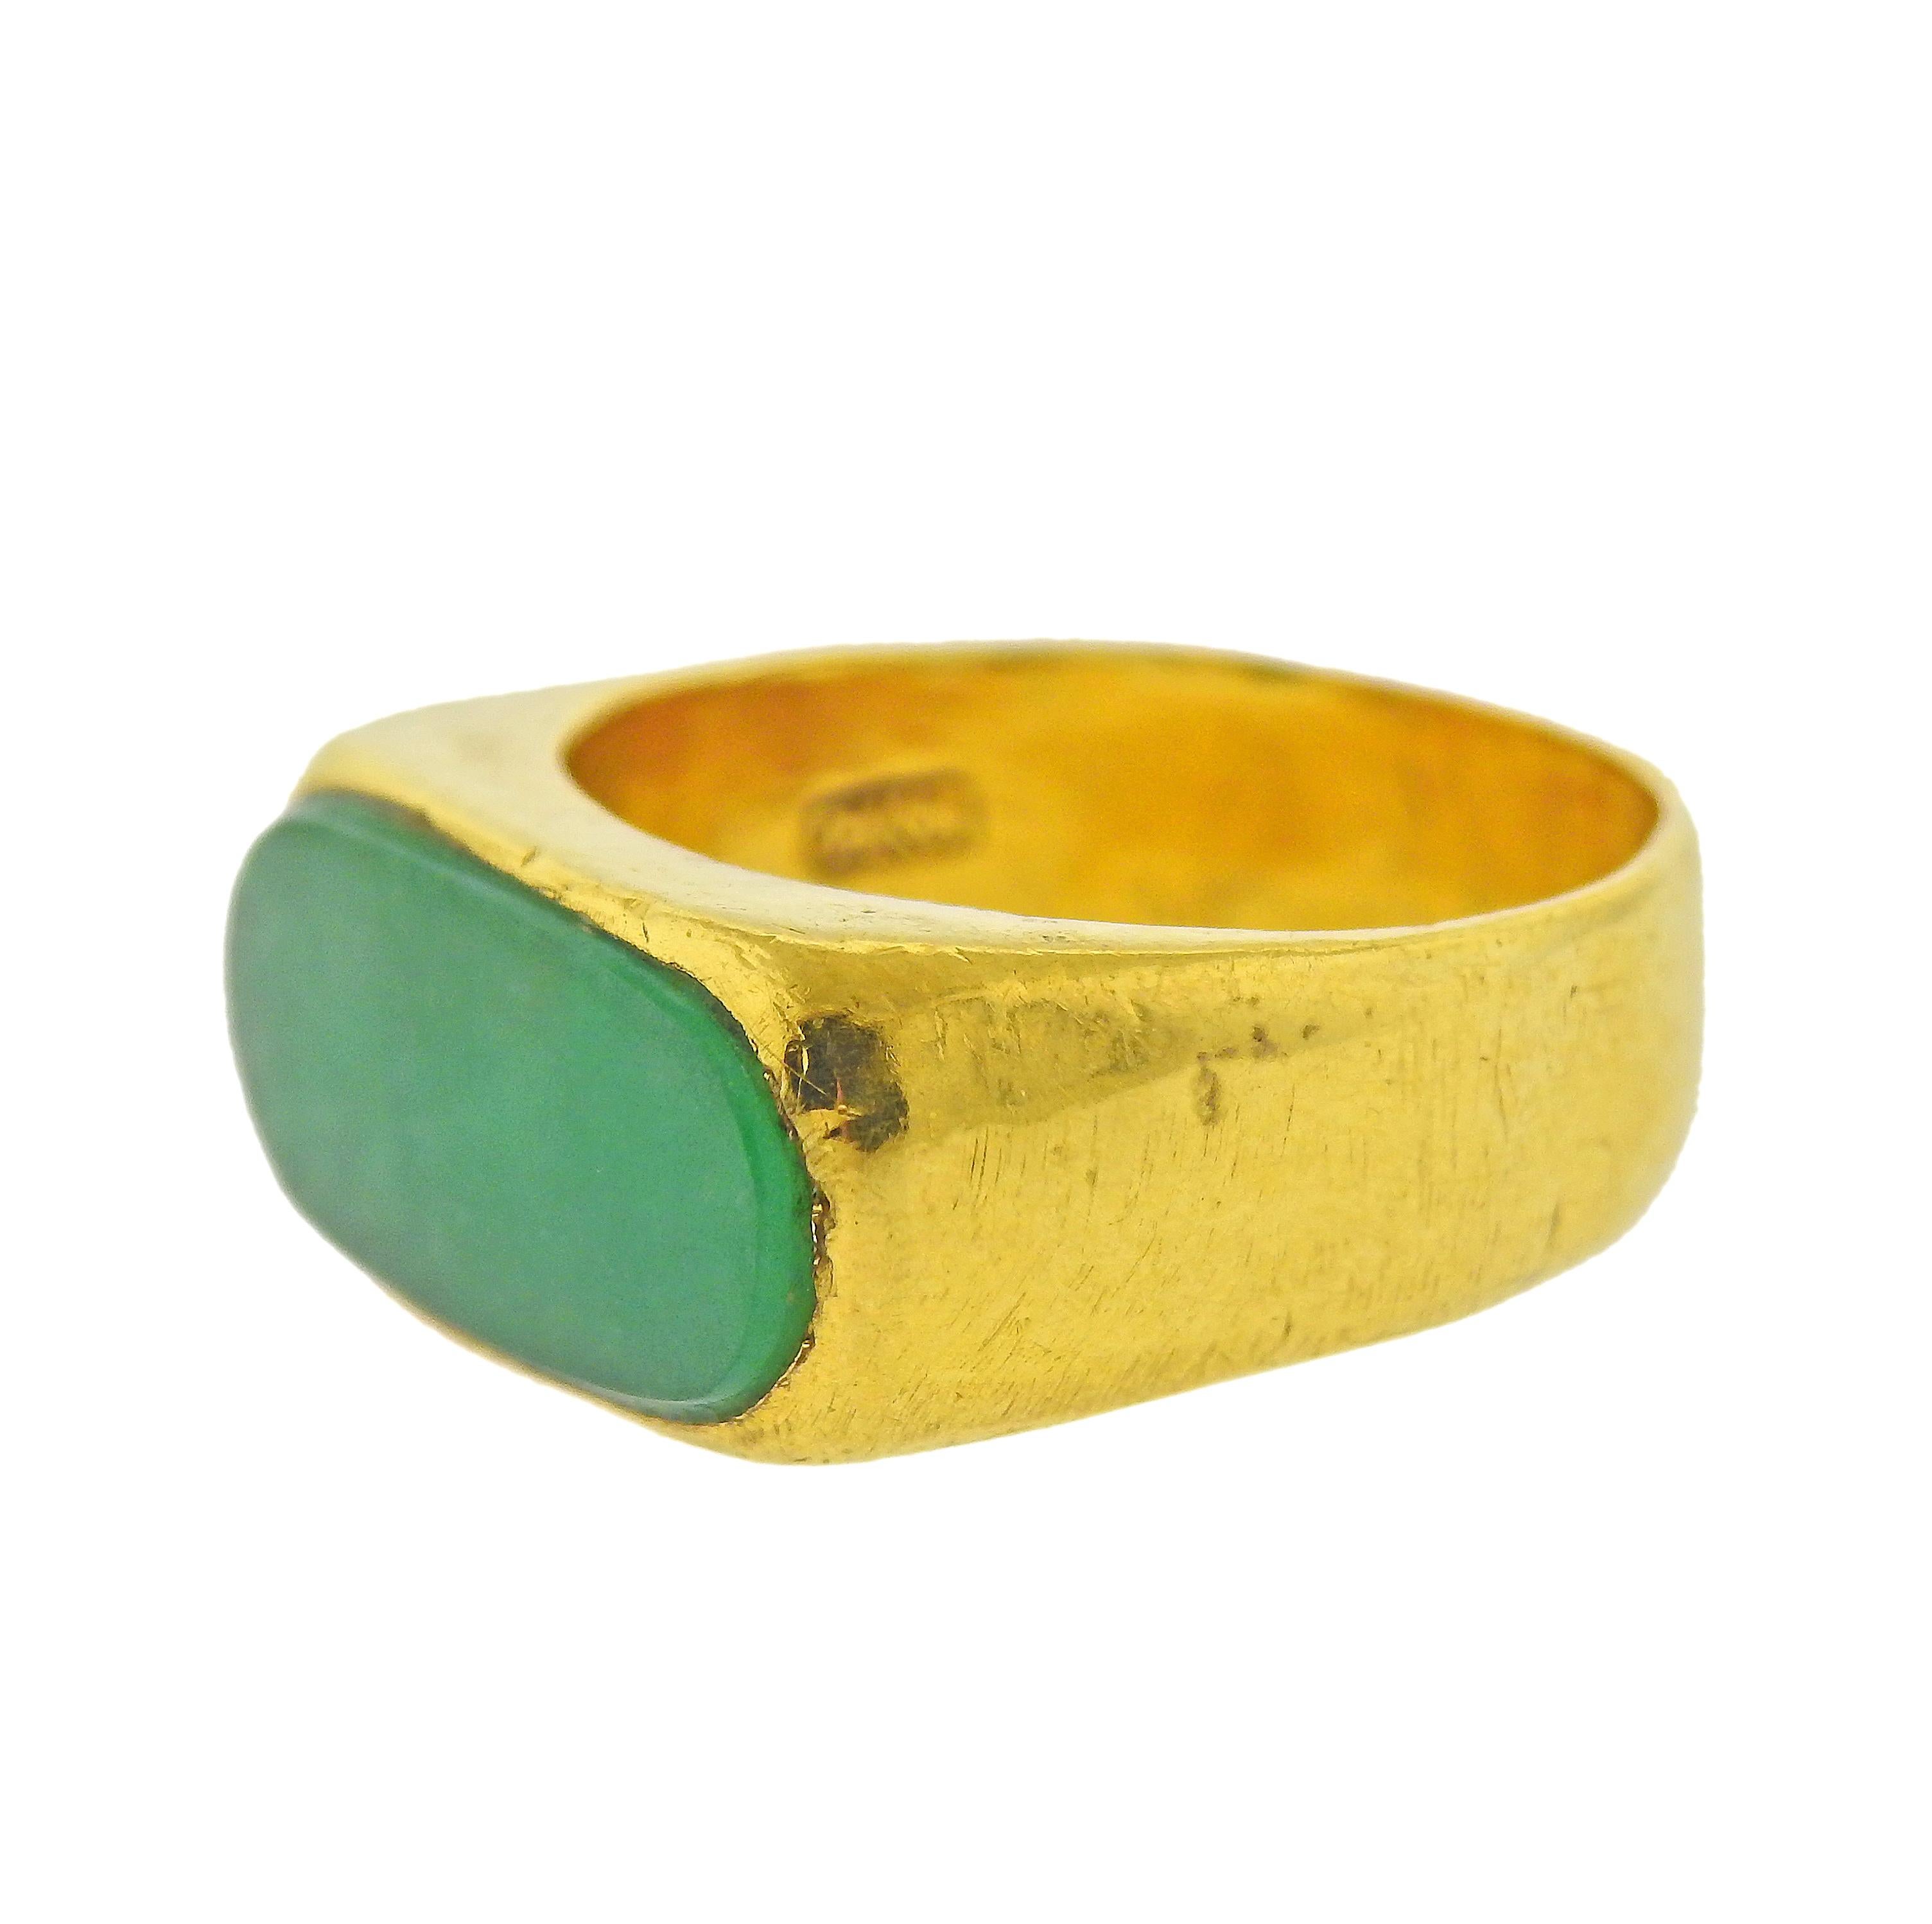 24k yellow gold ring, with natural jadeite jade, measuring 18.3 x 8.6 x 2.6mm. Ring size - 8.75, ring top is 10mm wide. Marked:999, Asian mark. Weight - 14.1 grams.